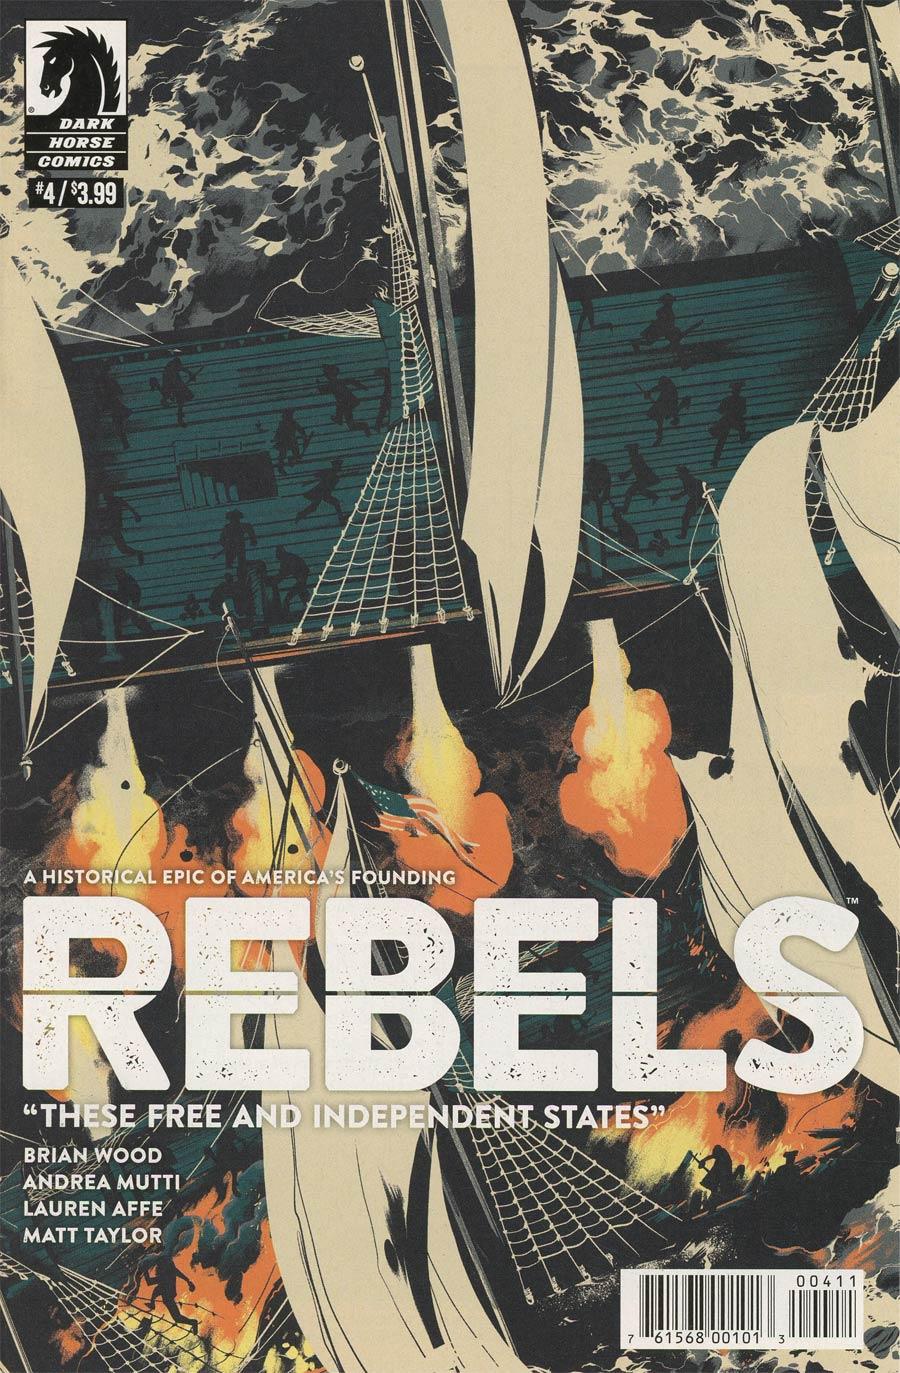 Rebels These Free And Independent States Vol. 1 #4